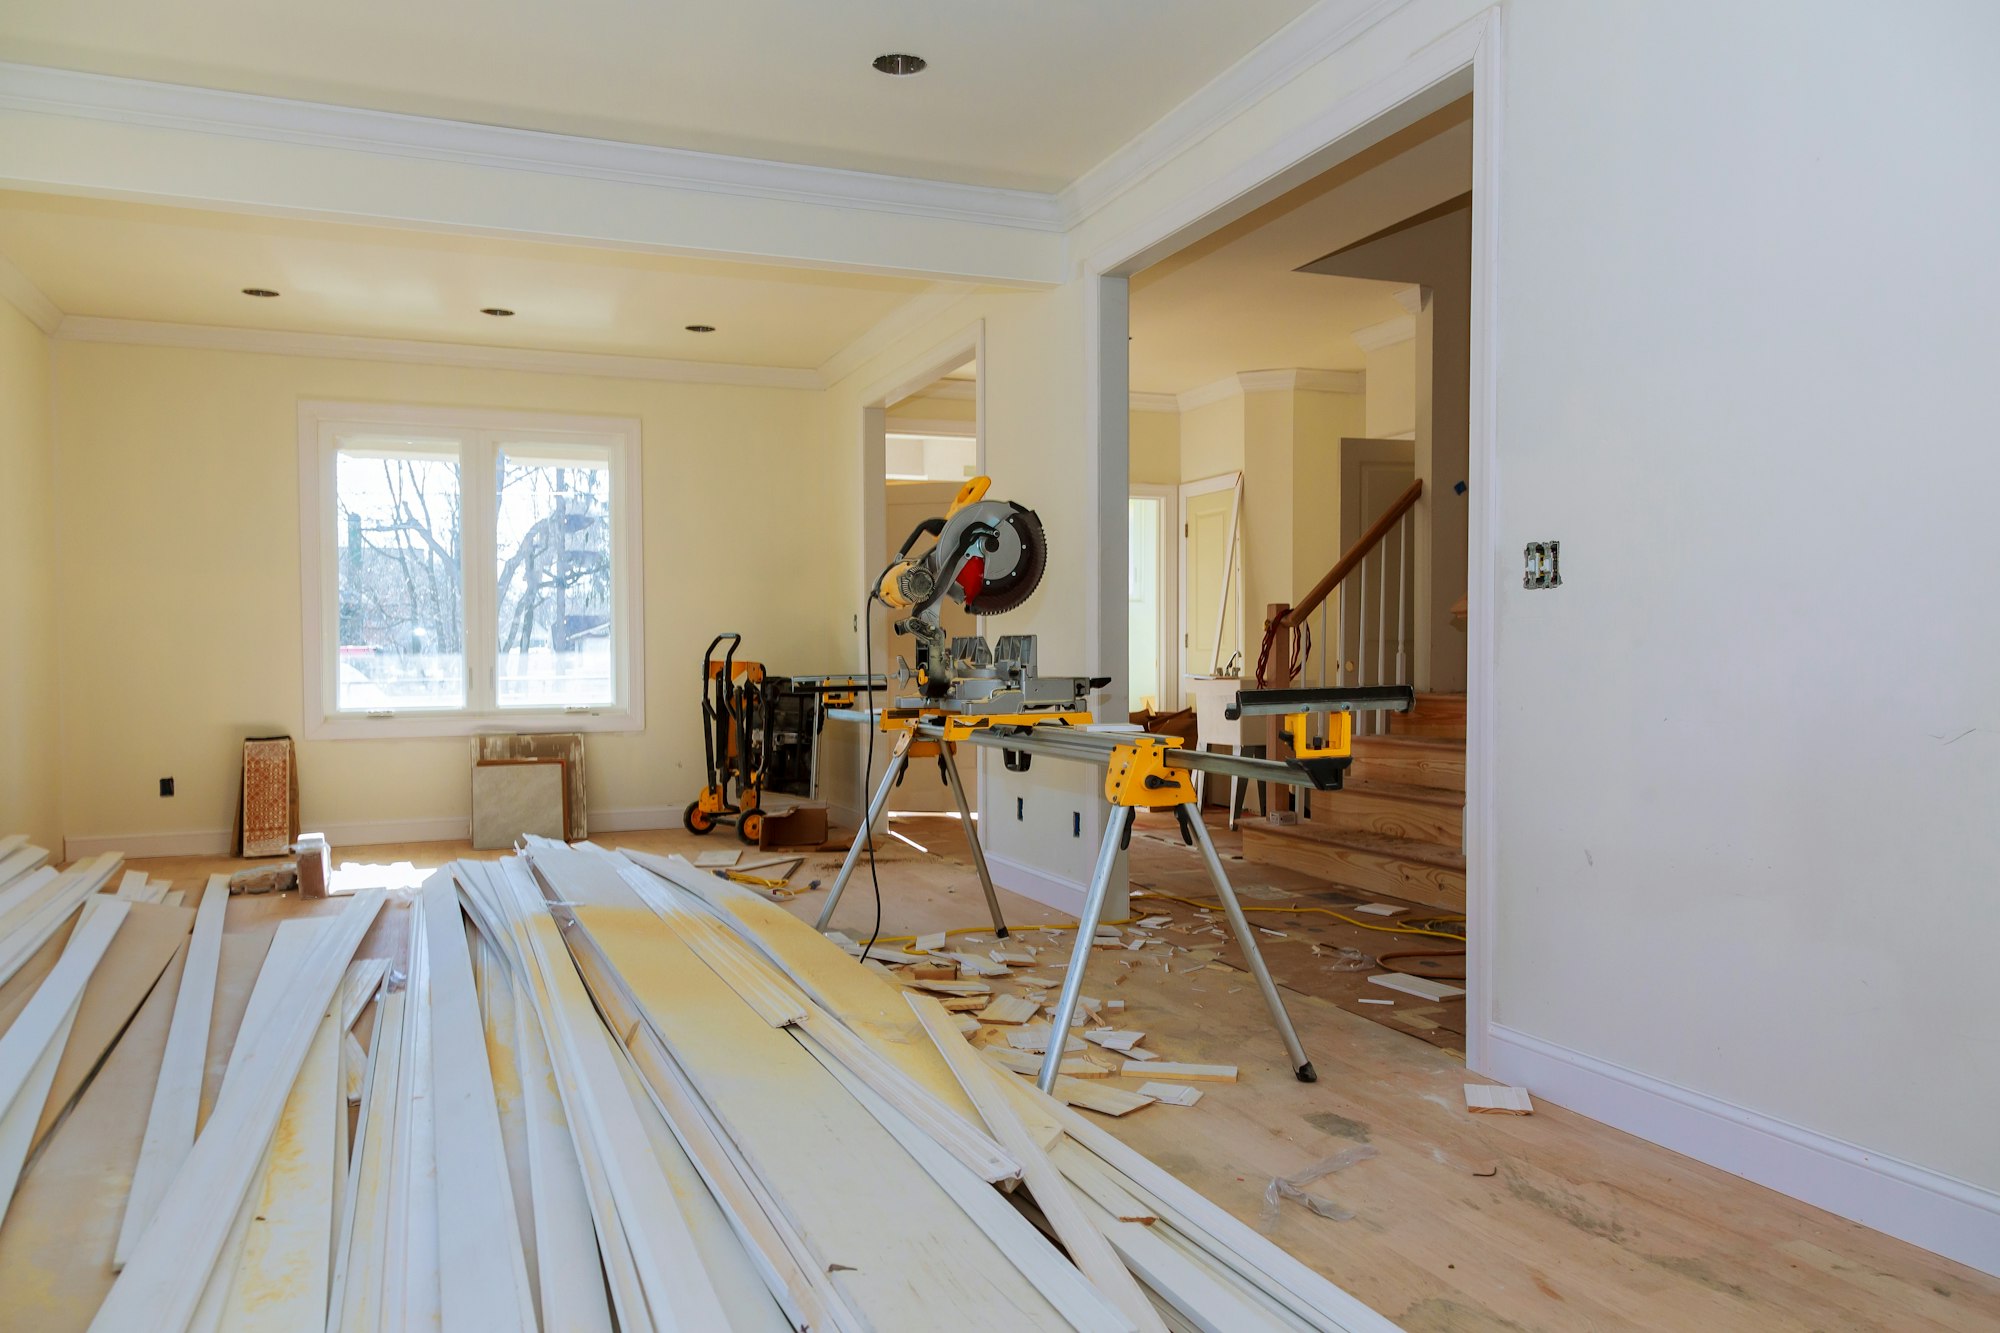 Circular saw cutting wooden trim on with on remodeling home